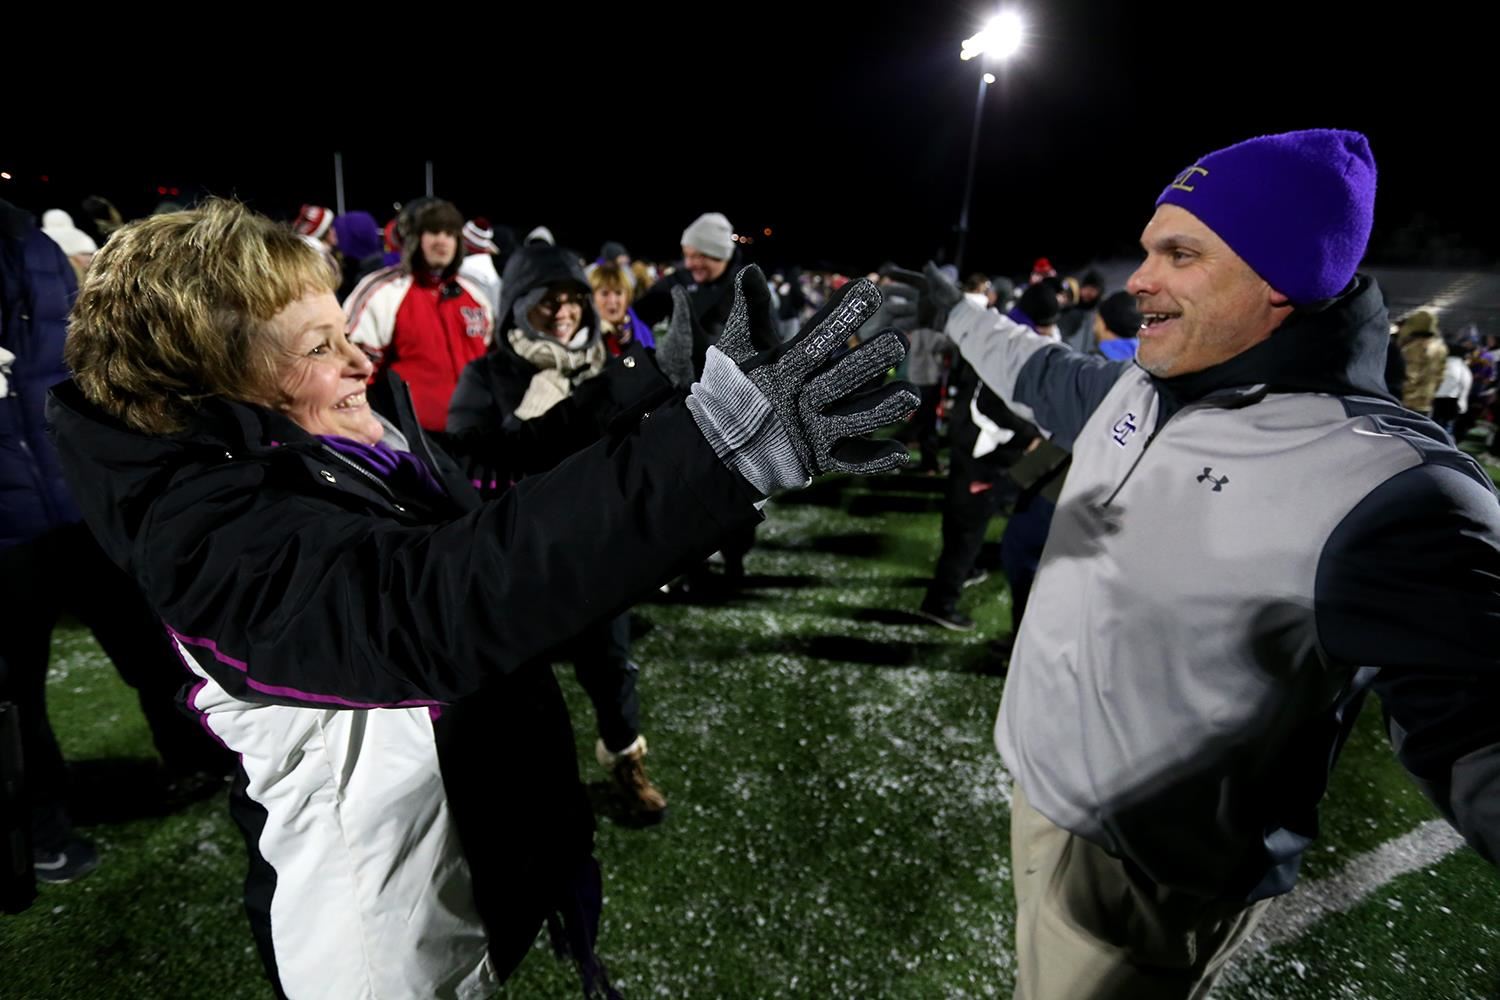 Maria & Jeff Tomlin smiling with arms open about to hug after a State Football playoff game